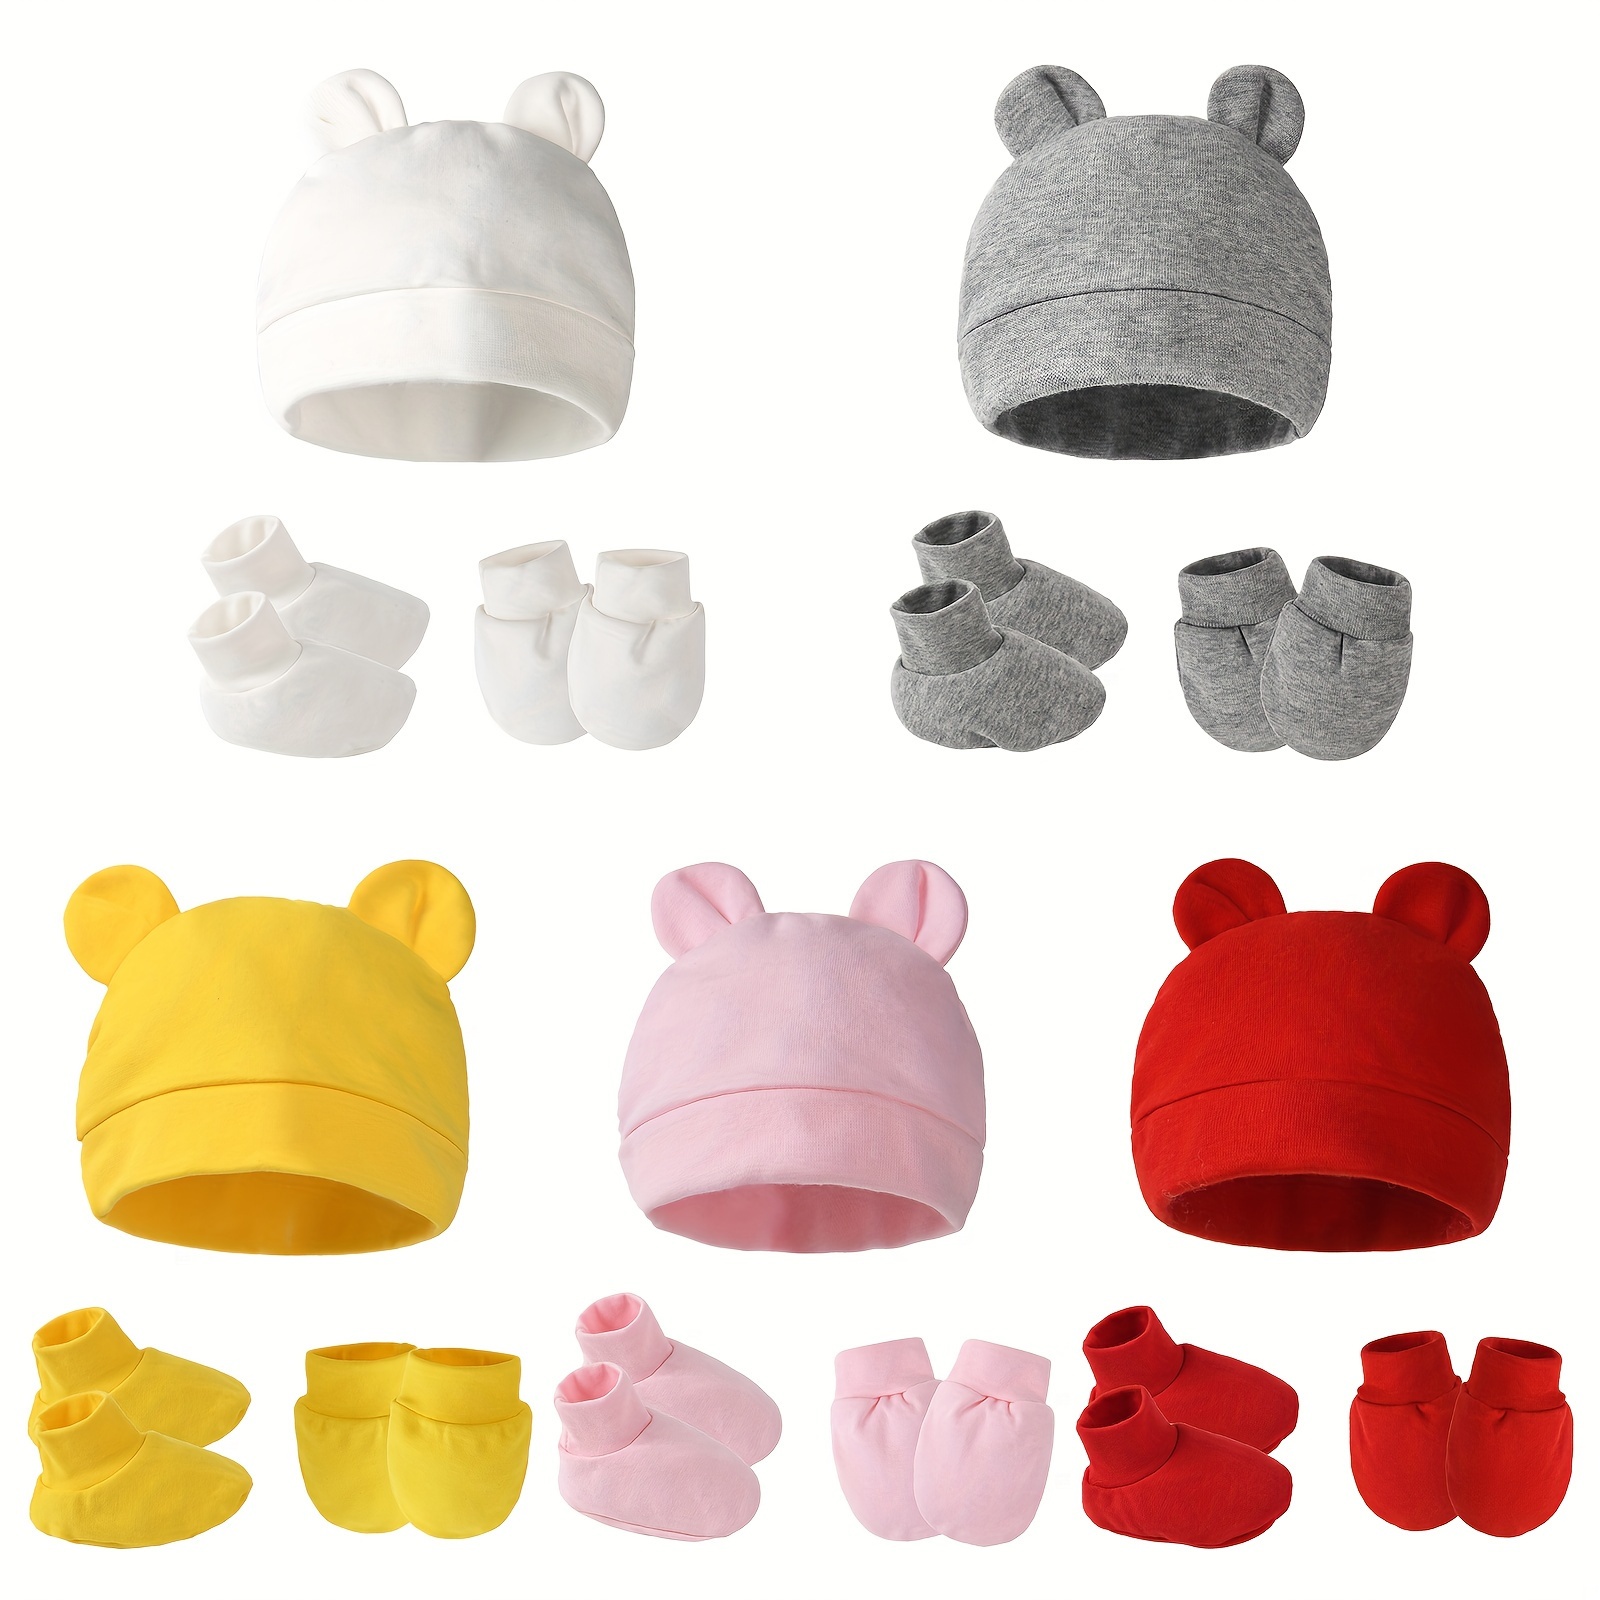 

3pcs Baby Soft Cozy Cotton Accessory Set - Cute Cartoon Animal Ears Beanie Hat, Matching Mittens & Anti-slip Socks For Newborns Aged 0-3 Months, Perfect Gift For Boys Girls